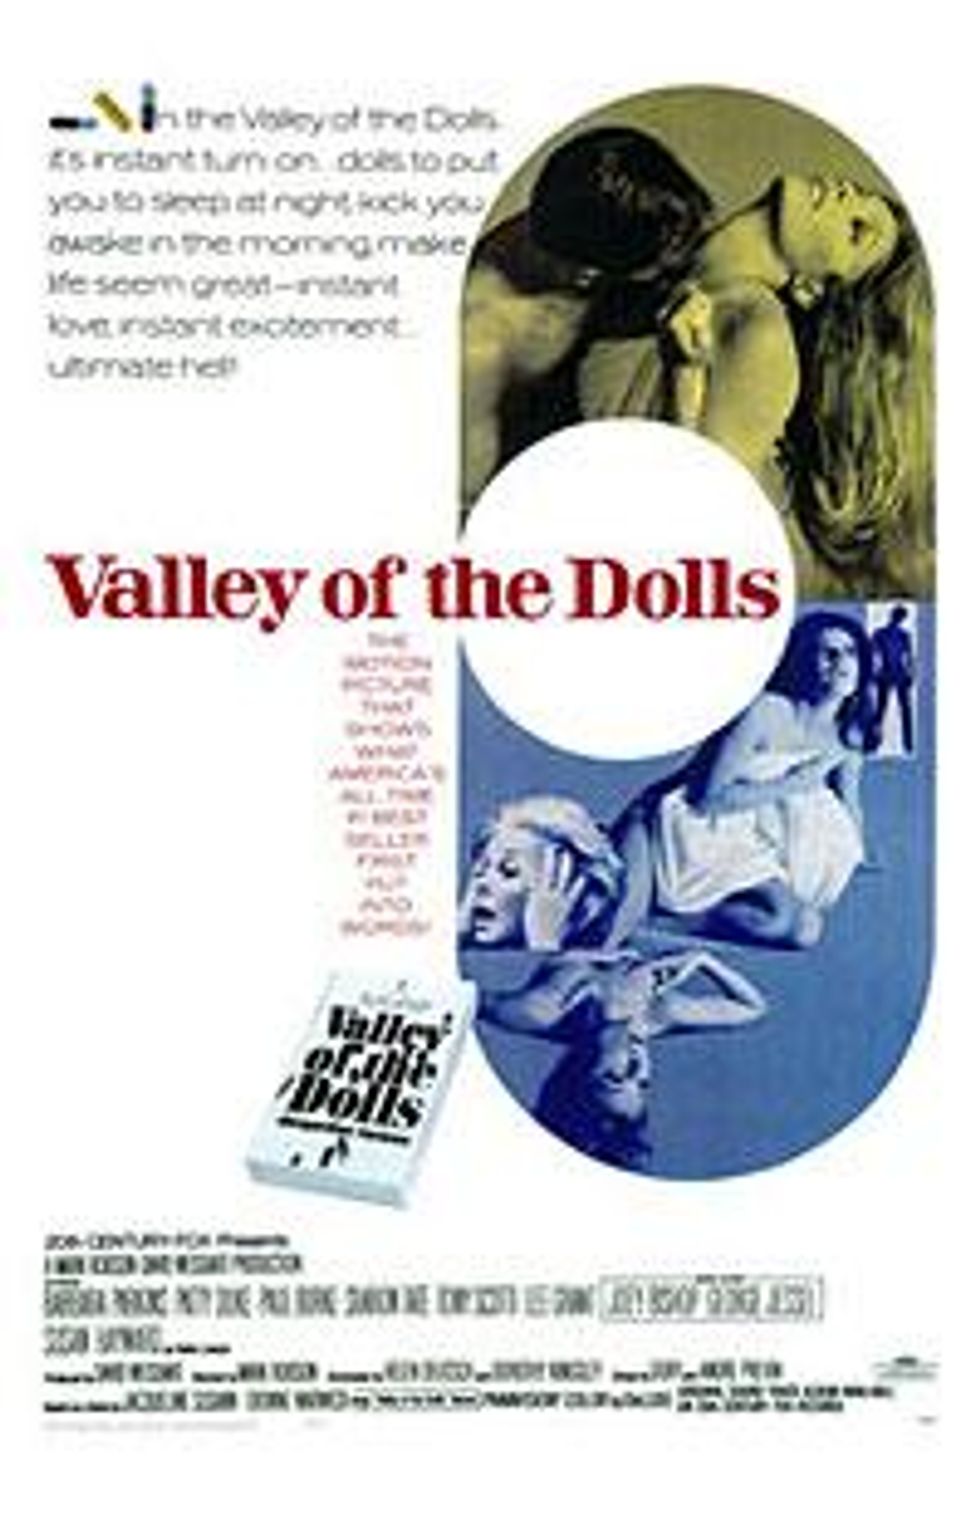 Valley_of_the_dolls_posterx200_0